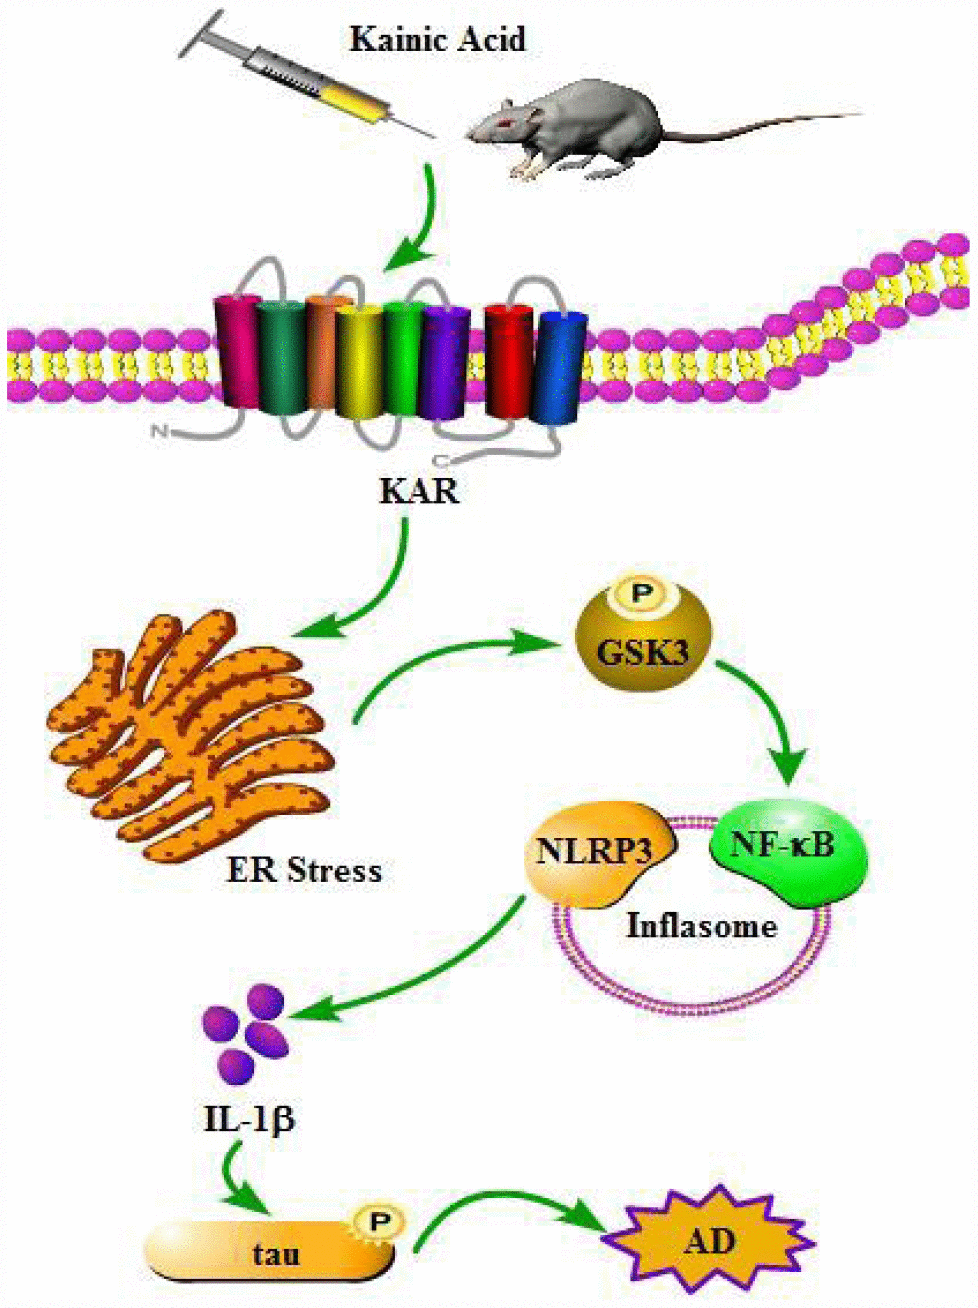 A functional model of KA-induced inflammasome activity through tau phosphorylation and memory deficits were exacerbated in an ER stress-dependent mechanism. KA treatment triggers activation of the inflammasome and causes the phosphorylation of NF-κB, leading to NLRP3 upregulation via ER stress. Upregulated NLRP3 eventually results in the phosphorylation of tau by enhancing the expression of IL-1β. Bay11-7082 inhibits KA-induced IL-1β activation and tau phosphorylation by alleviating the activity of inflammasome, which ultimately improved the cognitive decline in MAPT Tg mice.